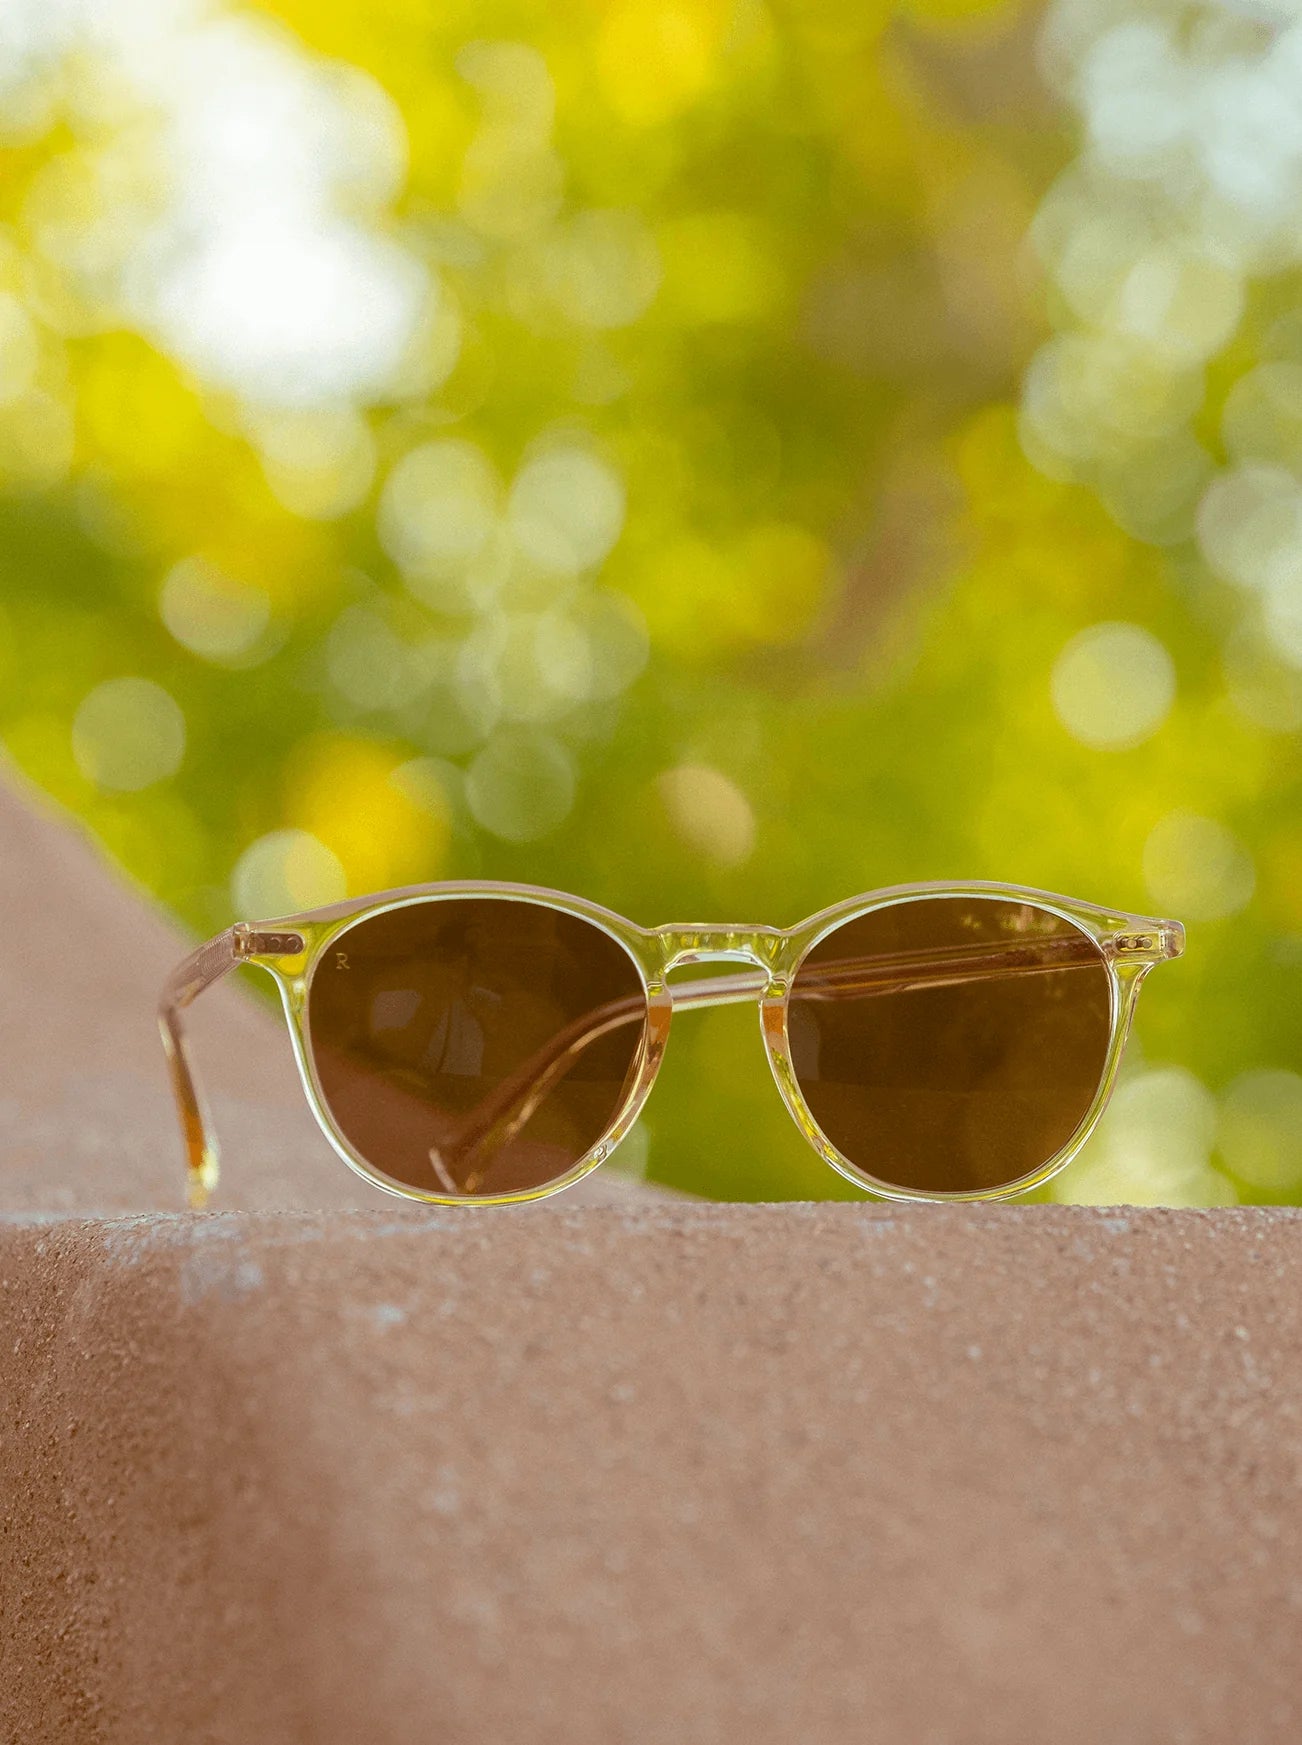 Pair of RAEN's Basq Round Sunglasses with Champagne Crystal frames and Suntan lenses.